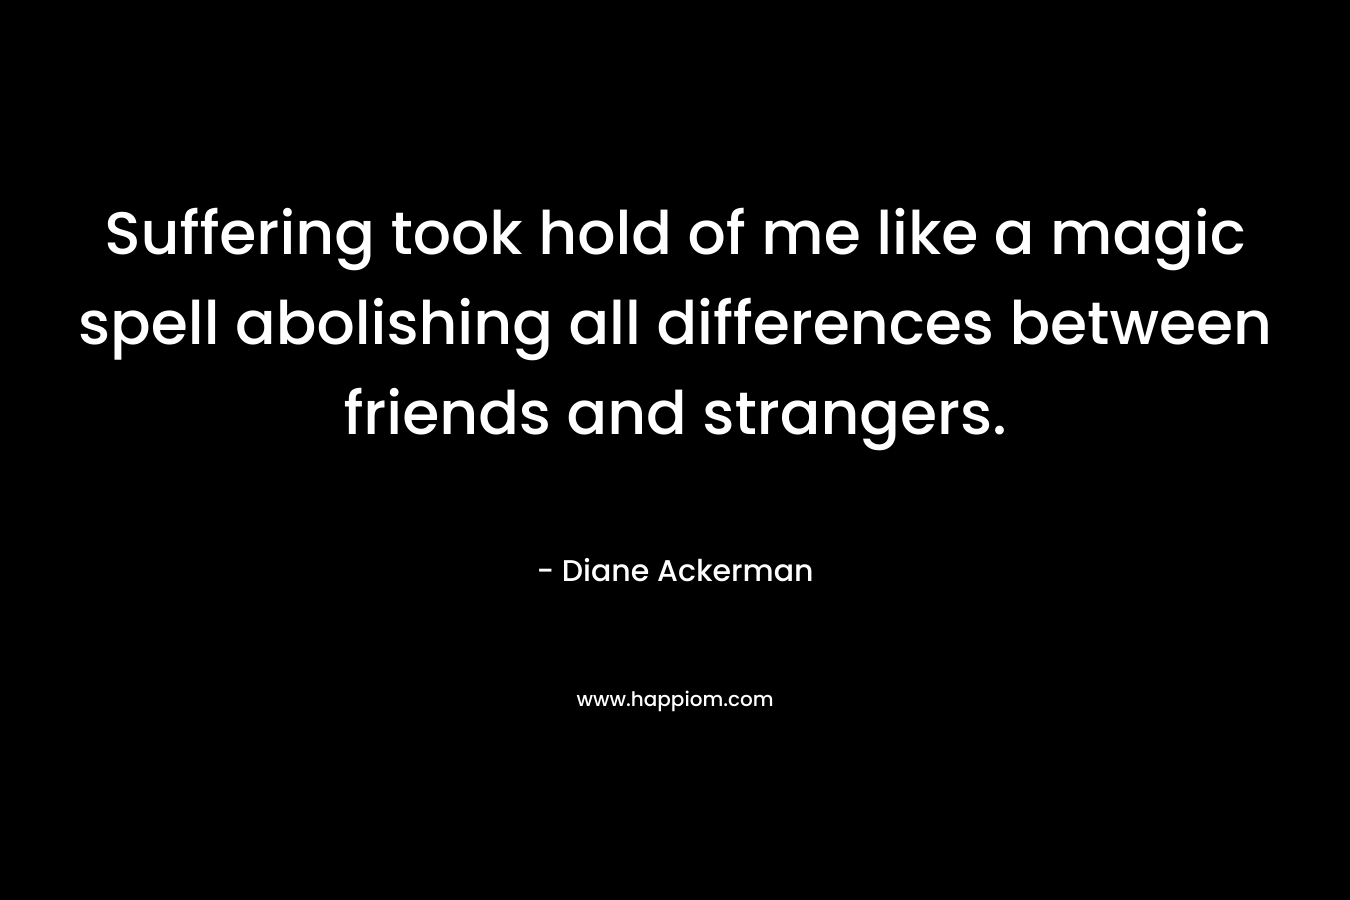 Suffering took hold of me like a magic spell abolishing all differences between friends and strangers. – Diane Ackerman